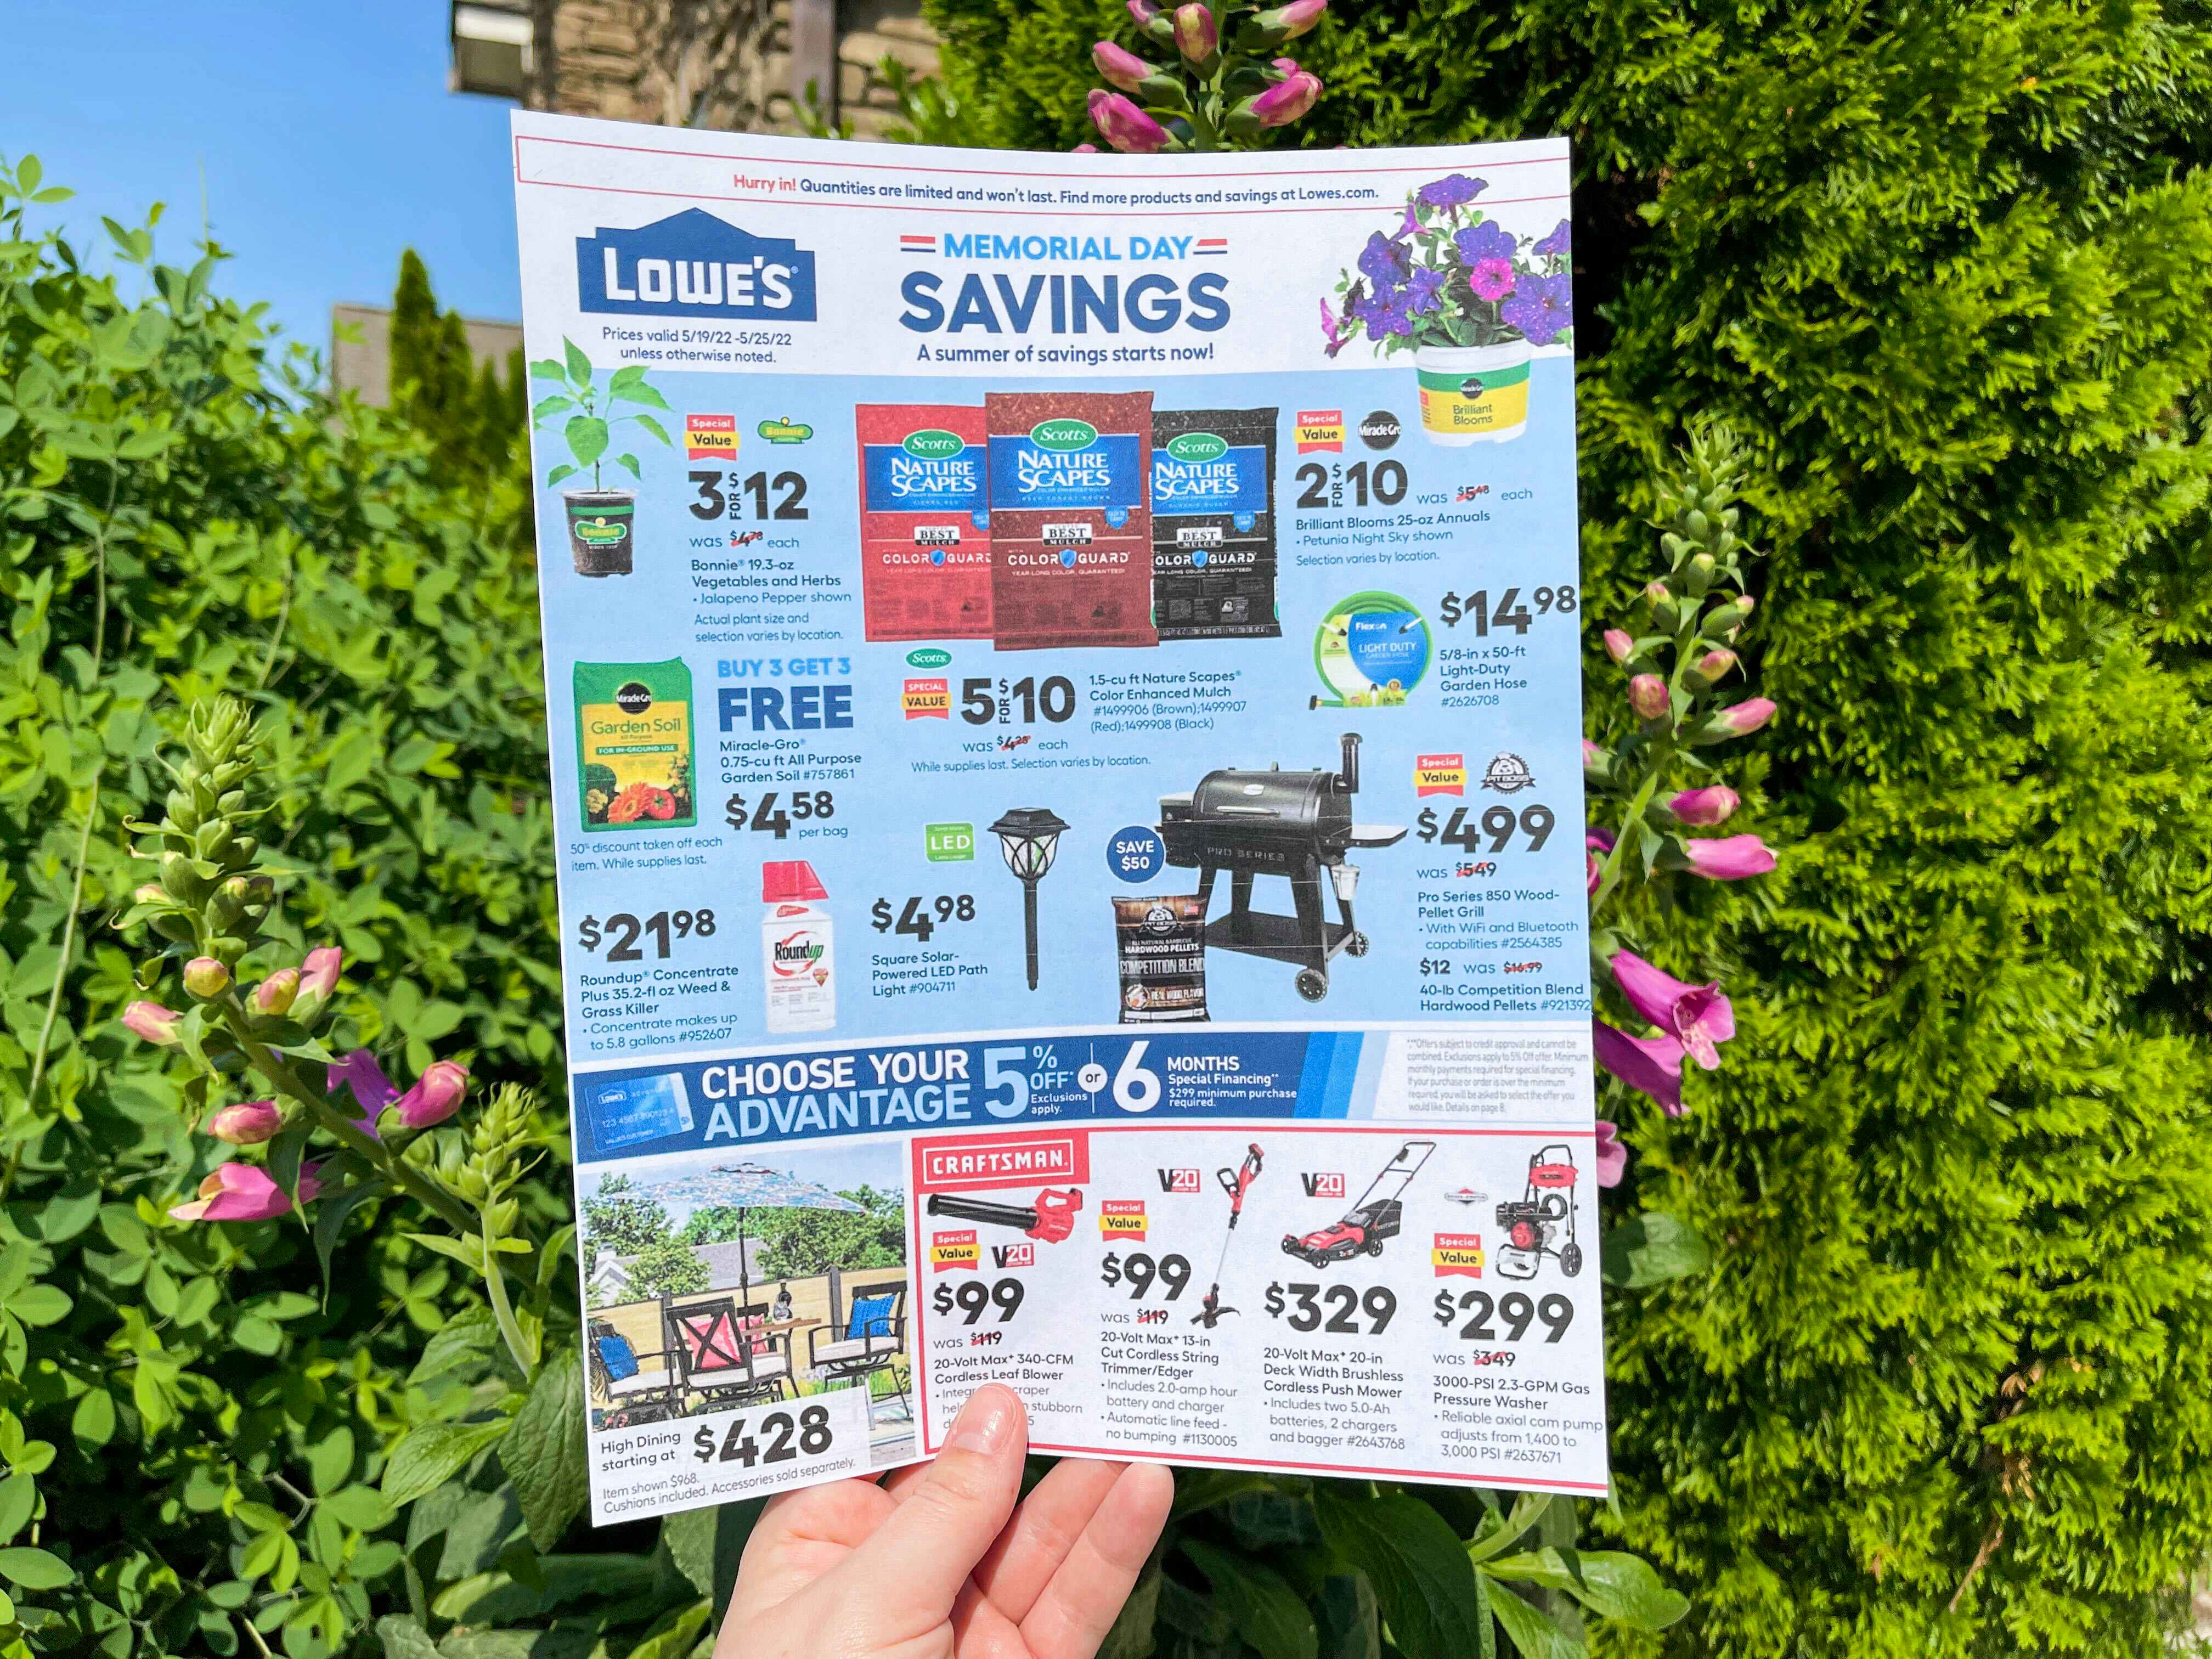 A person's hand holding up a Lowe's savings ad for the Memorial Day sale